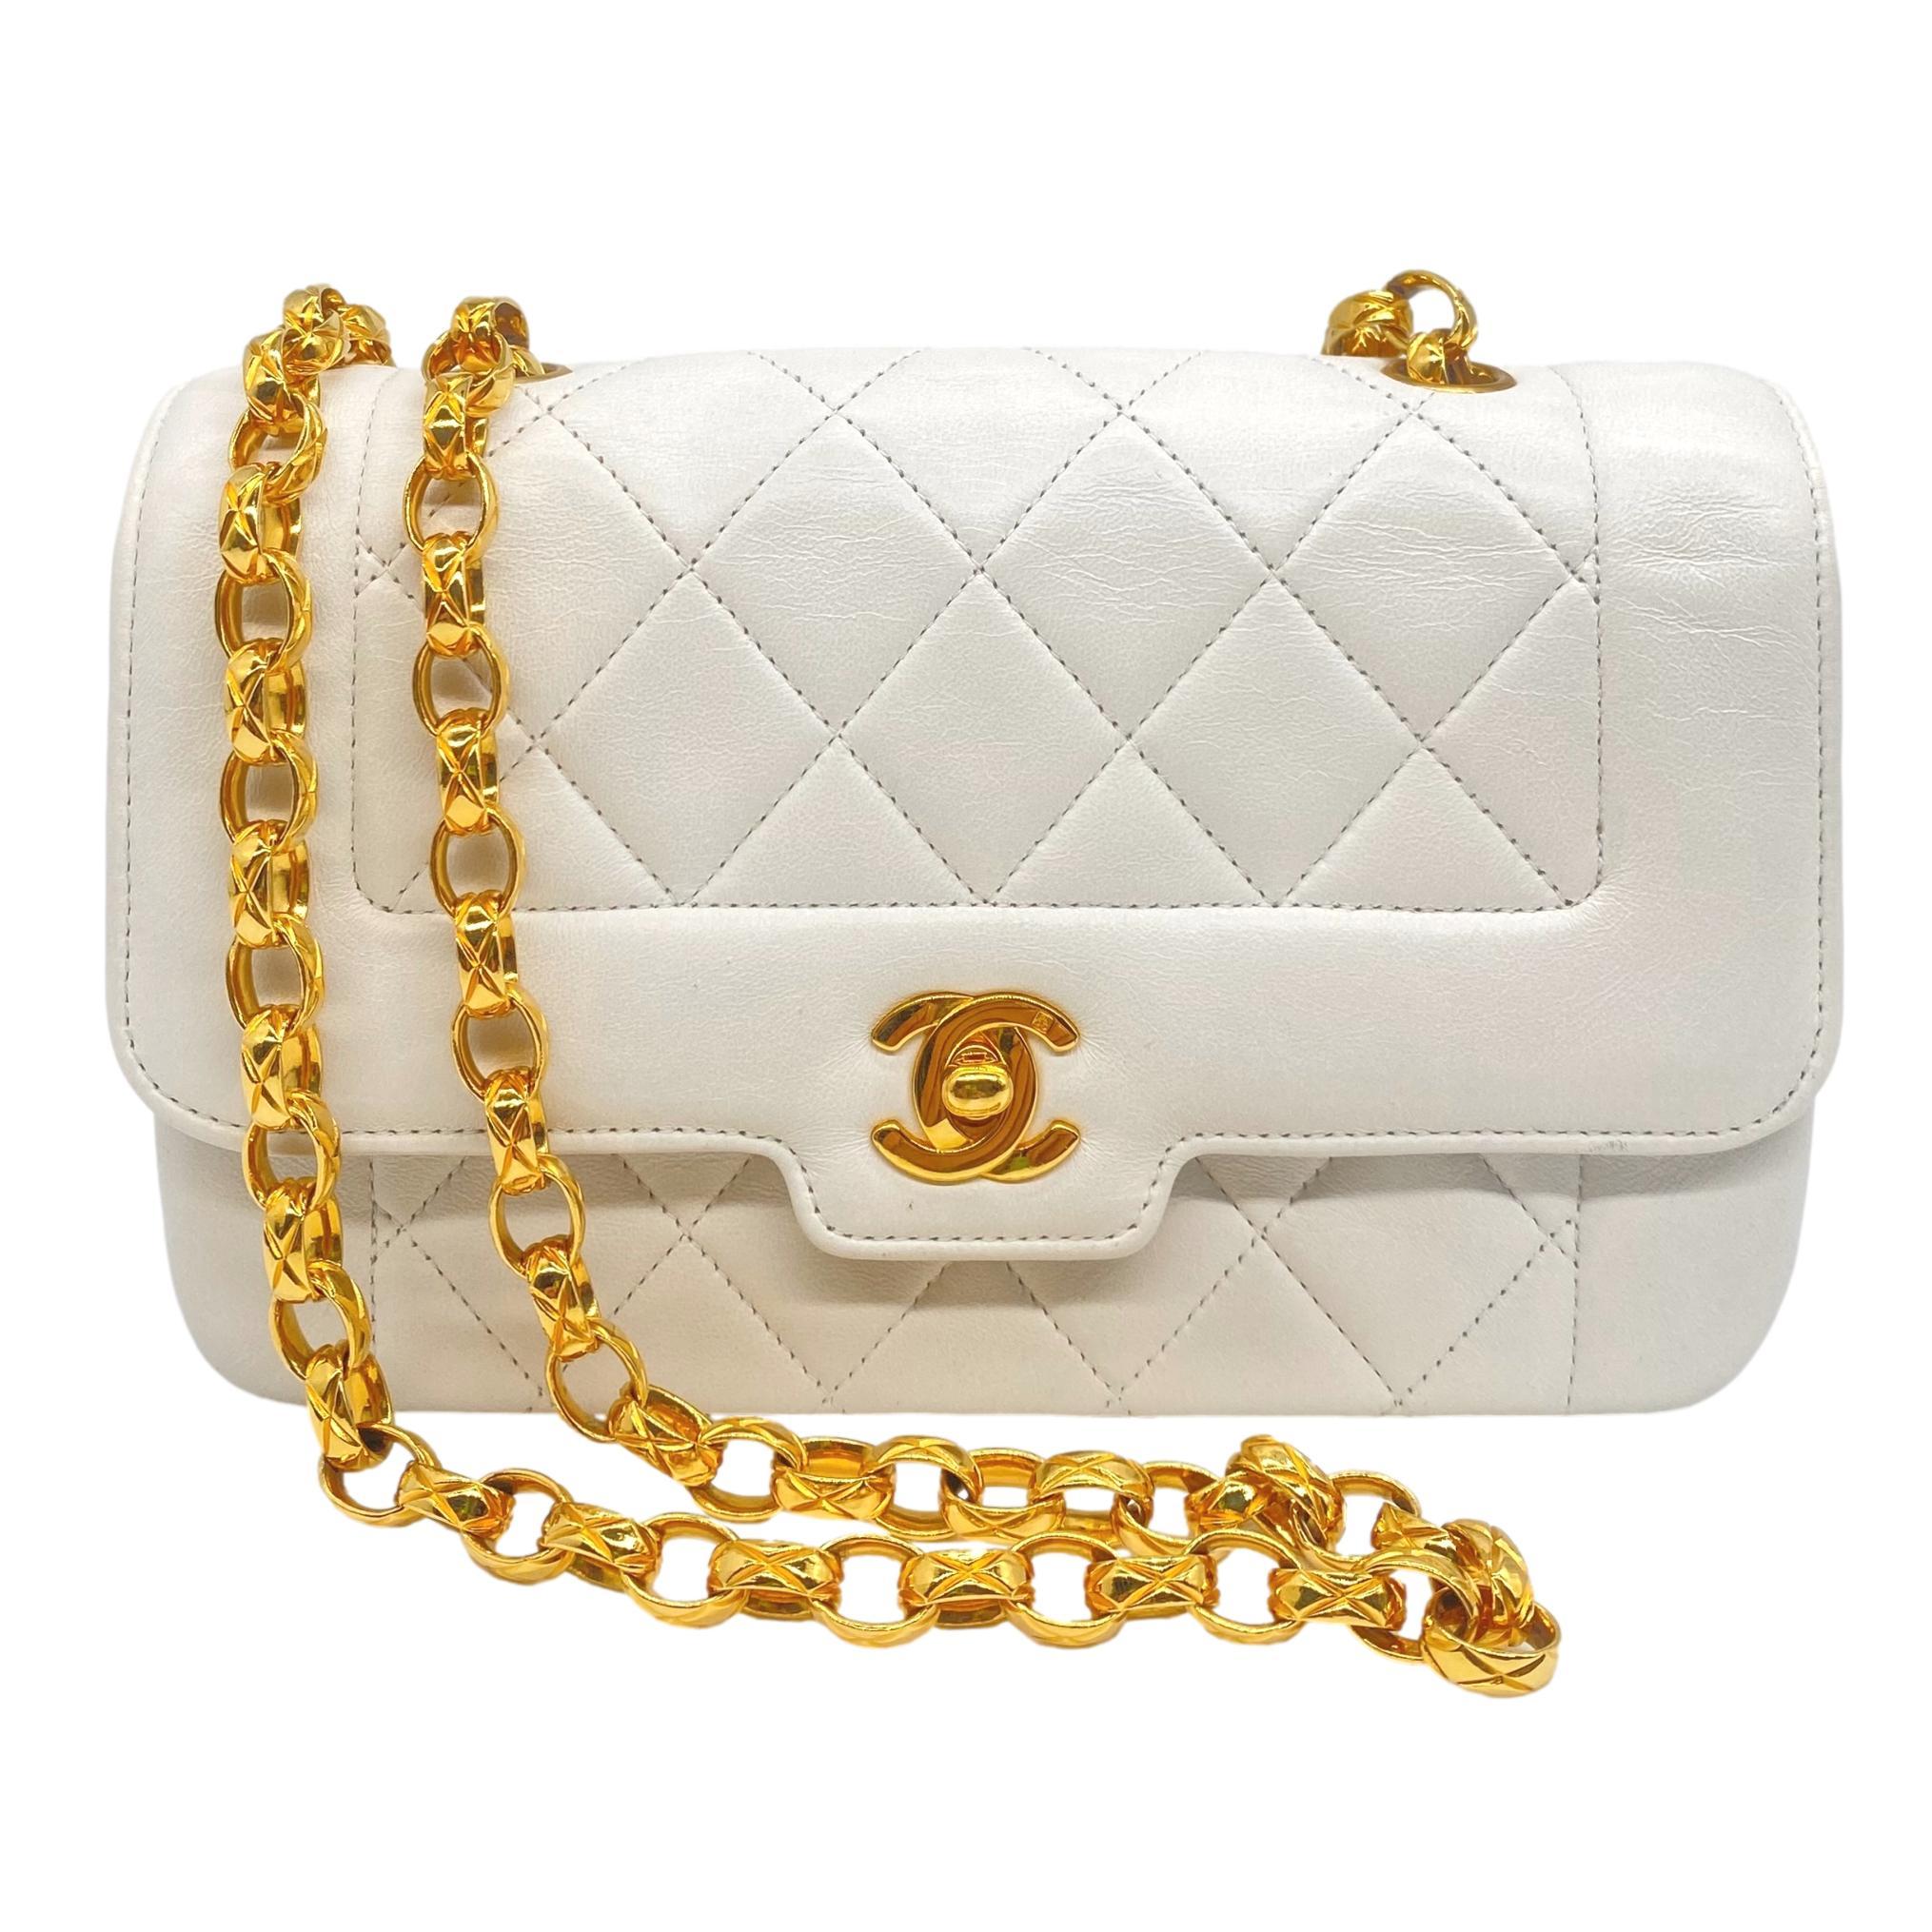 Chanel Mini Quilted White Lambskin Single Flap Bijoux Chain Shoulder Bag, 1989 - 1991. The iconic Chanel bag was originally issued by Coco Chanel in February 1955 which became the very first socially acceptable shoulder bag for the modern day woman